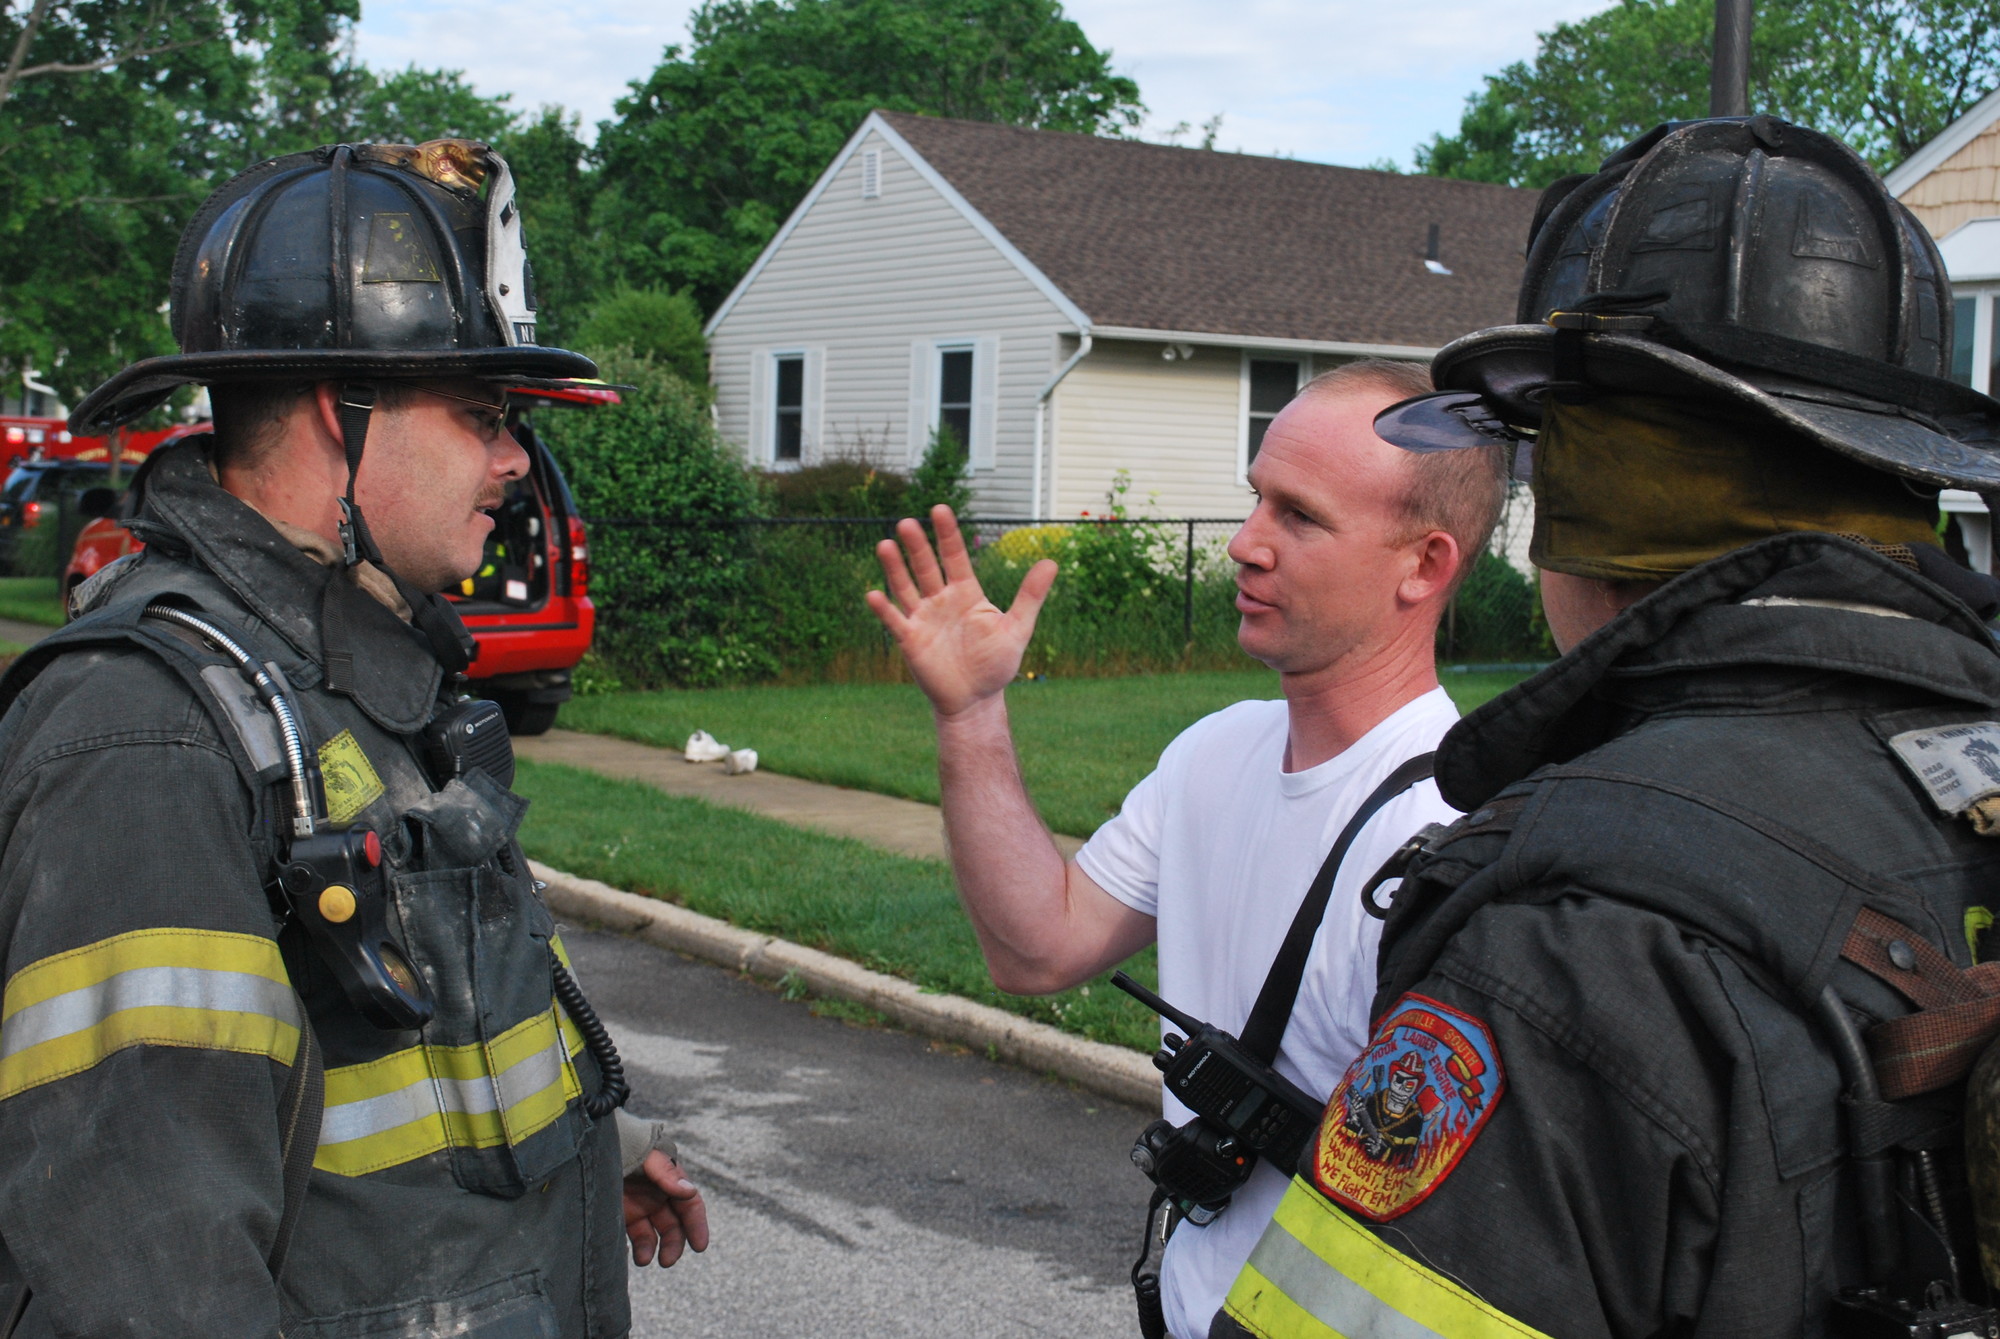 Collins, center, was a chief of the North Bellmore Fire Department from 2010 through 2014. He is pictured above working with firefighters on the scene of a basement blaze in a local home on June 17, 2013.